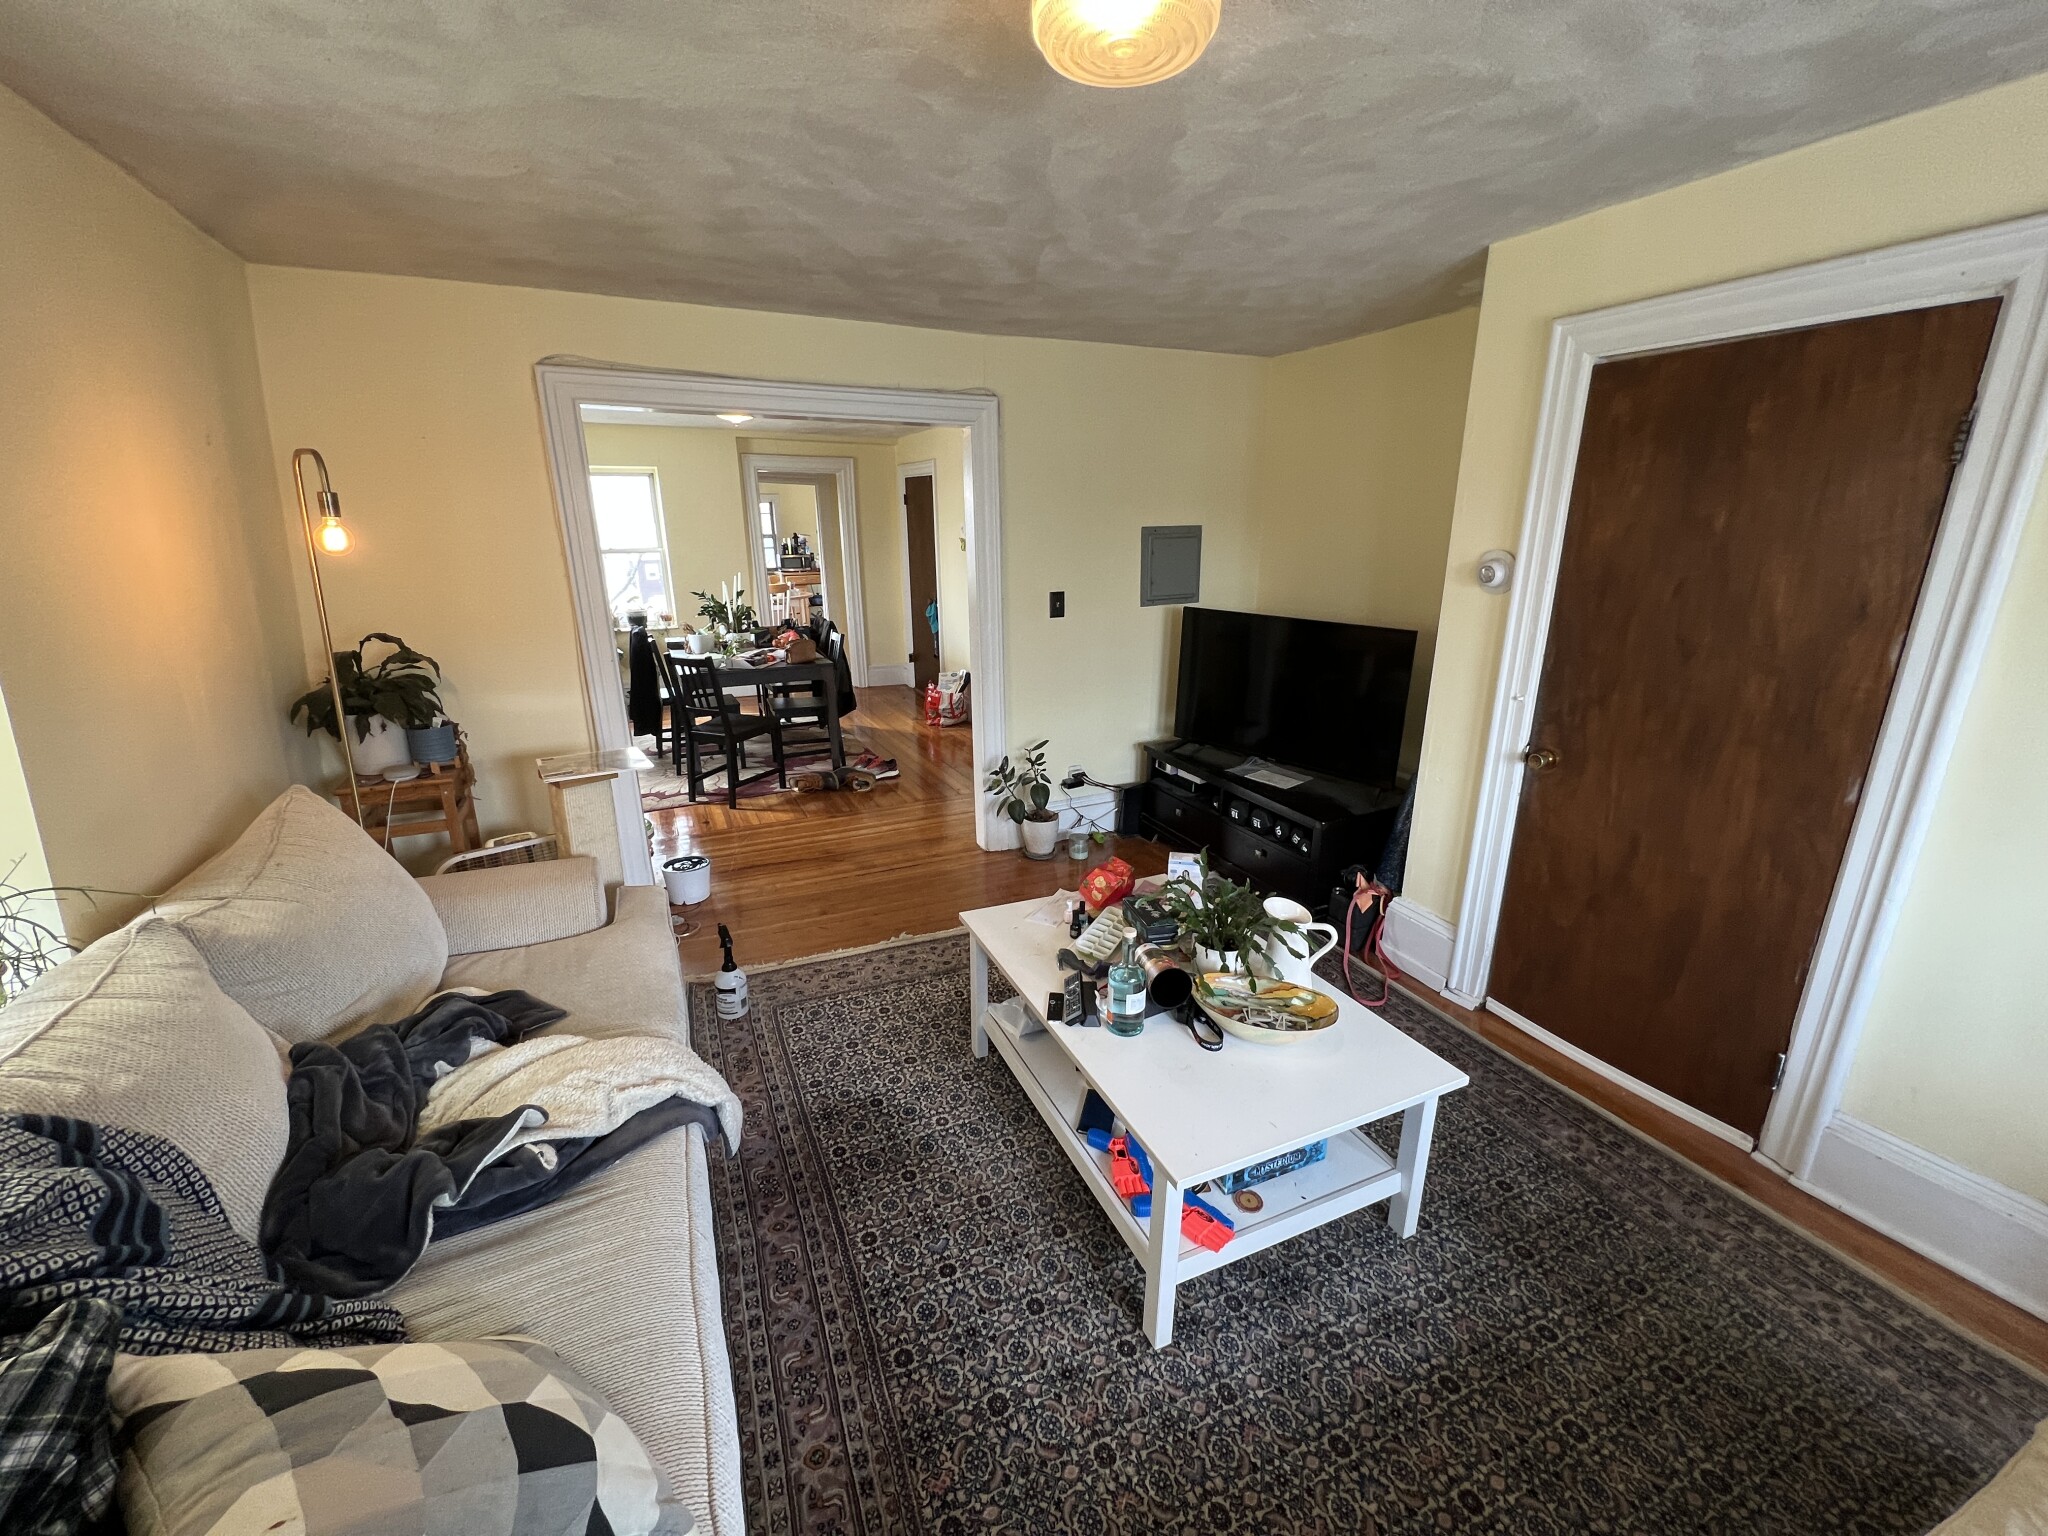 Photos of apartment on Boston Ave.,Somerville MA 02144